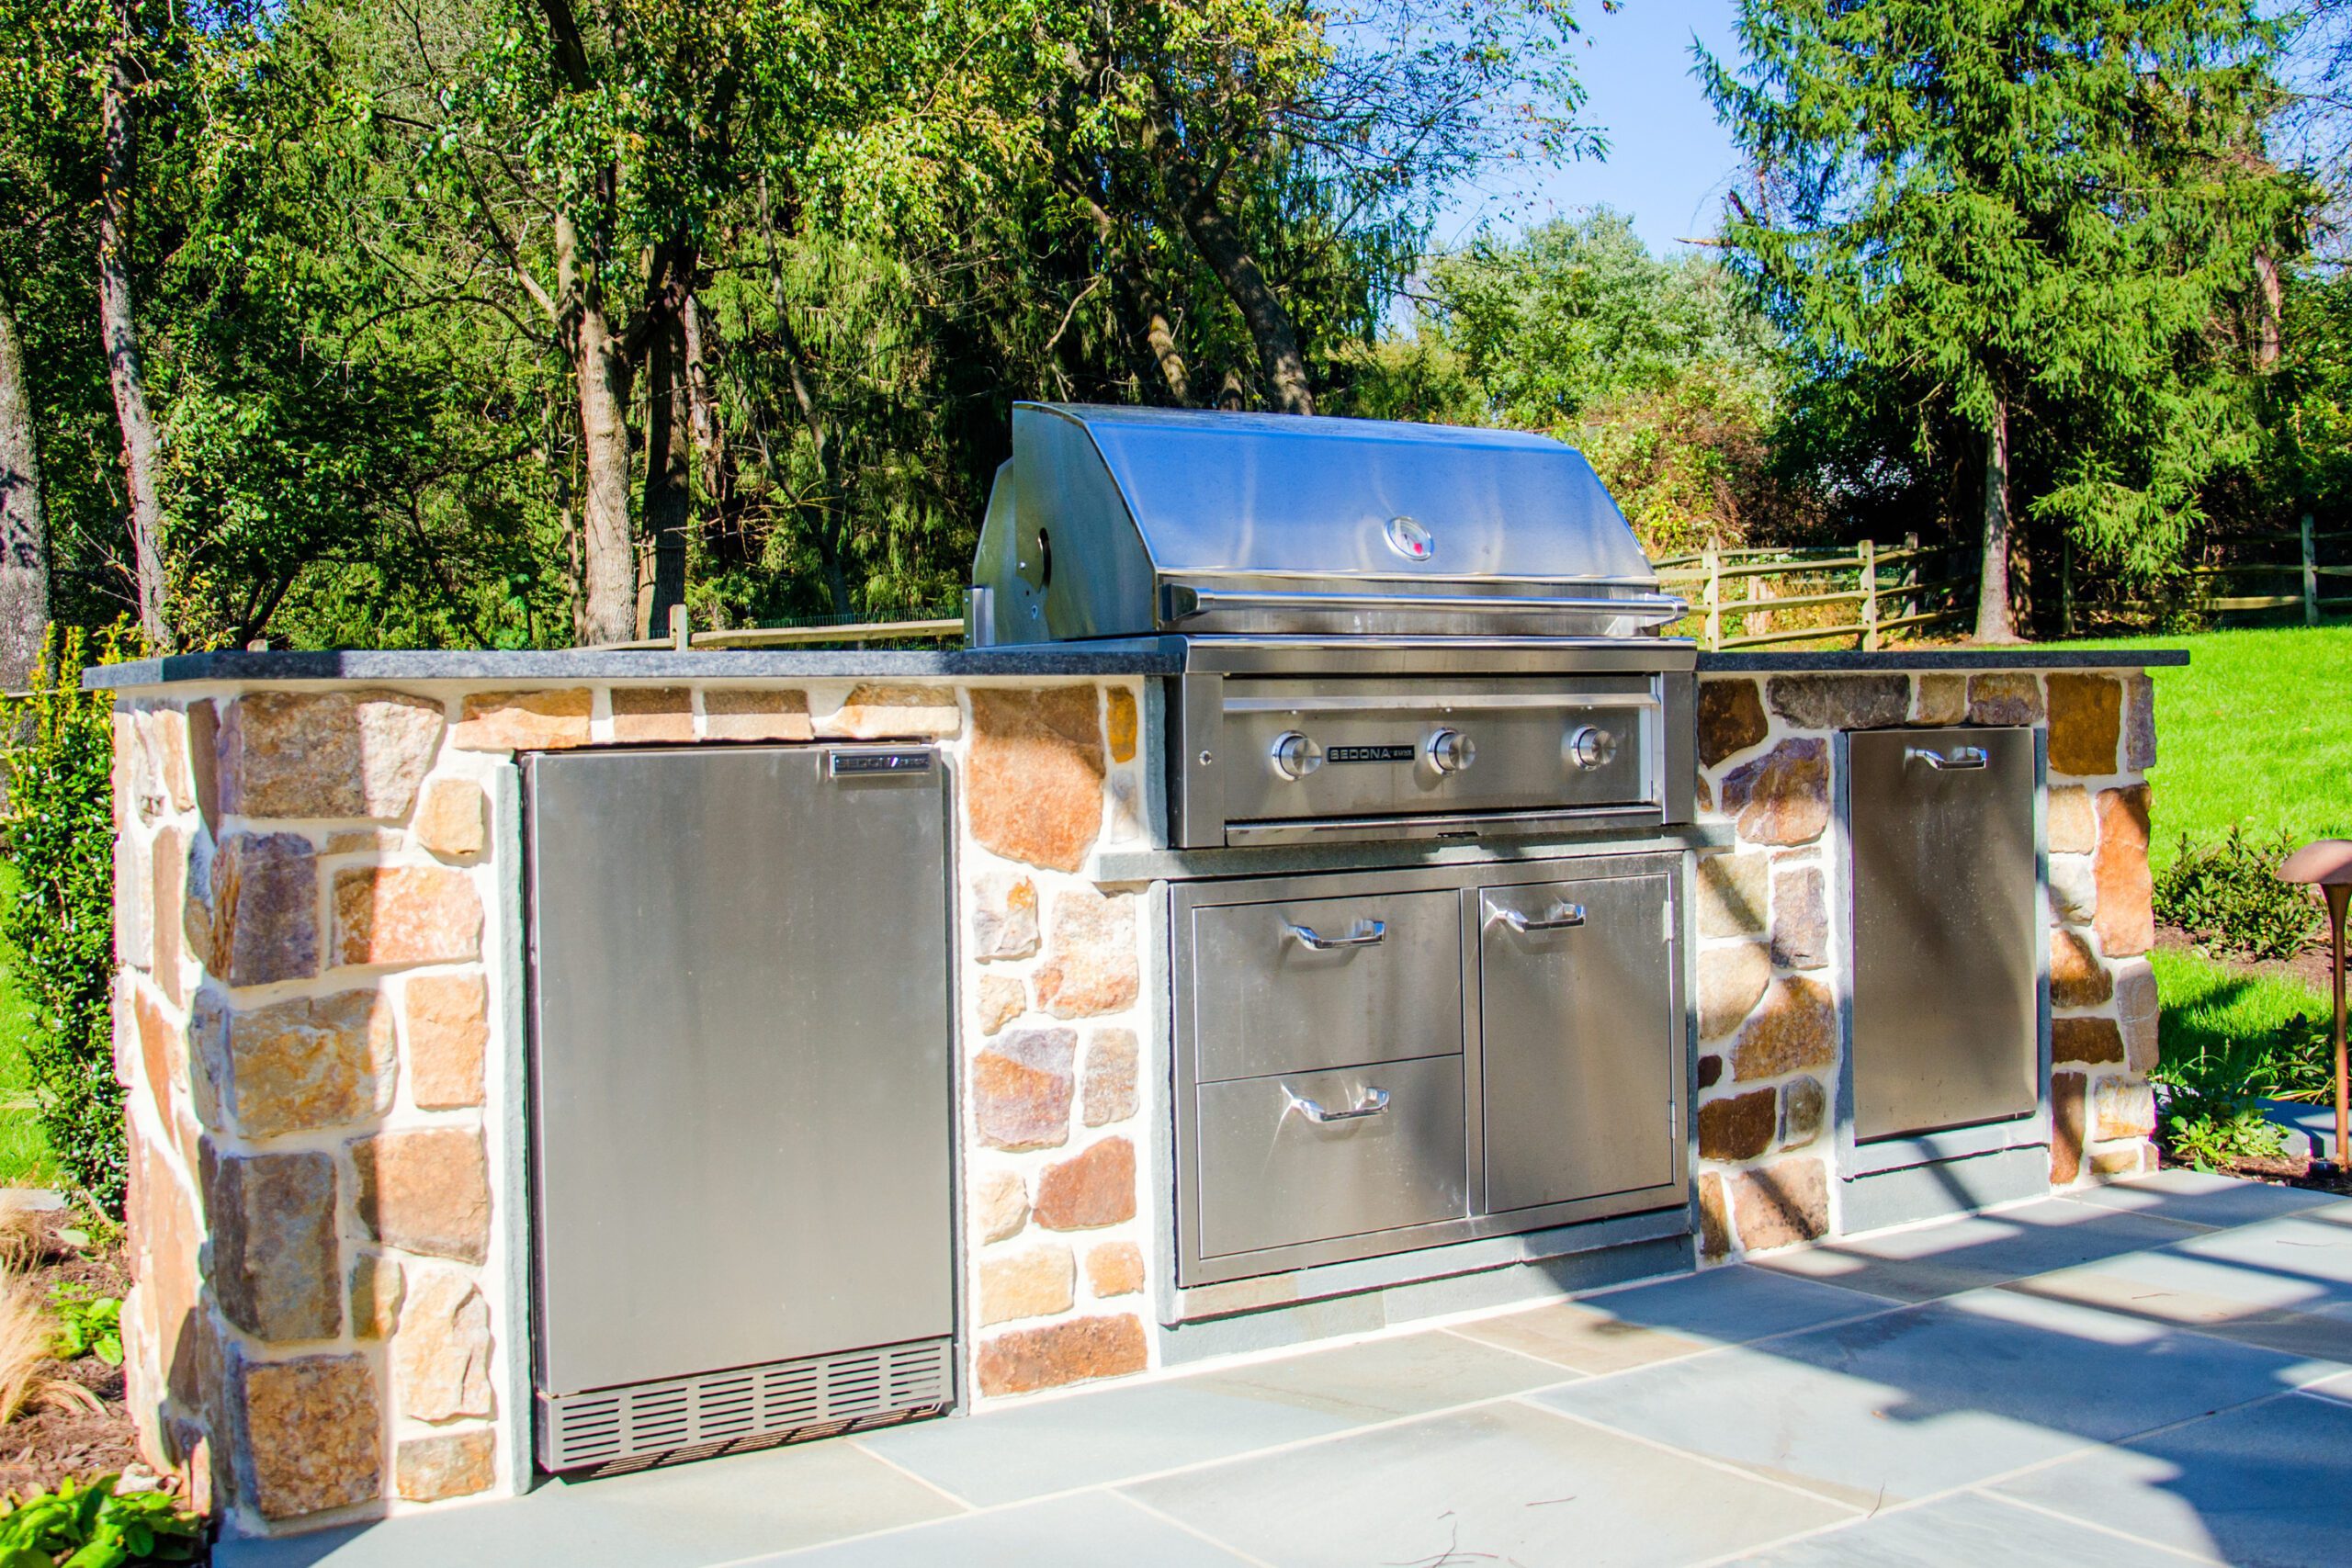 An outdoor kitchen features a refrigerator, grill, and sink.